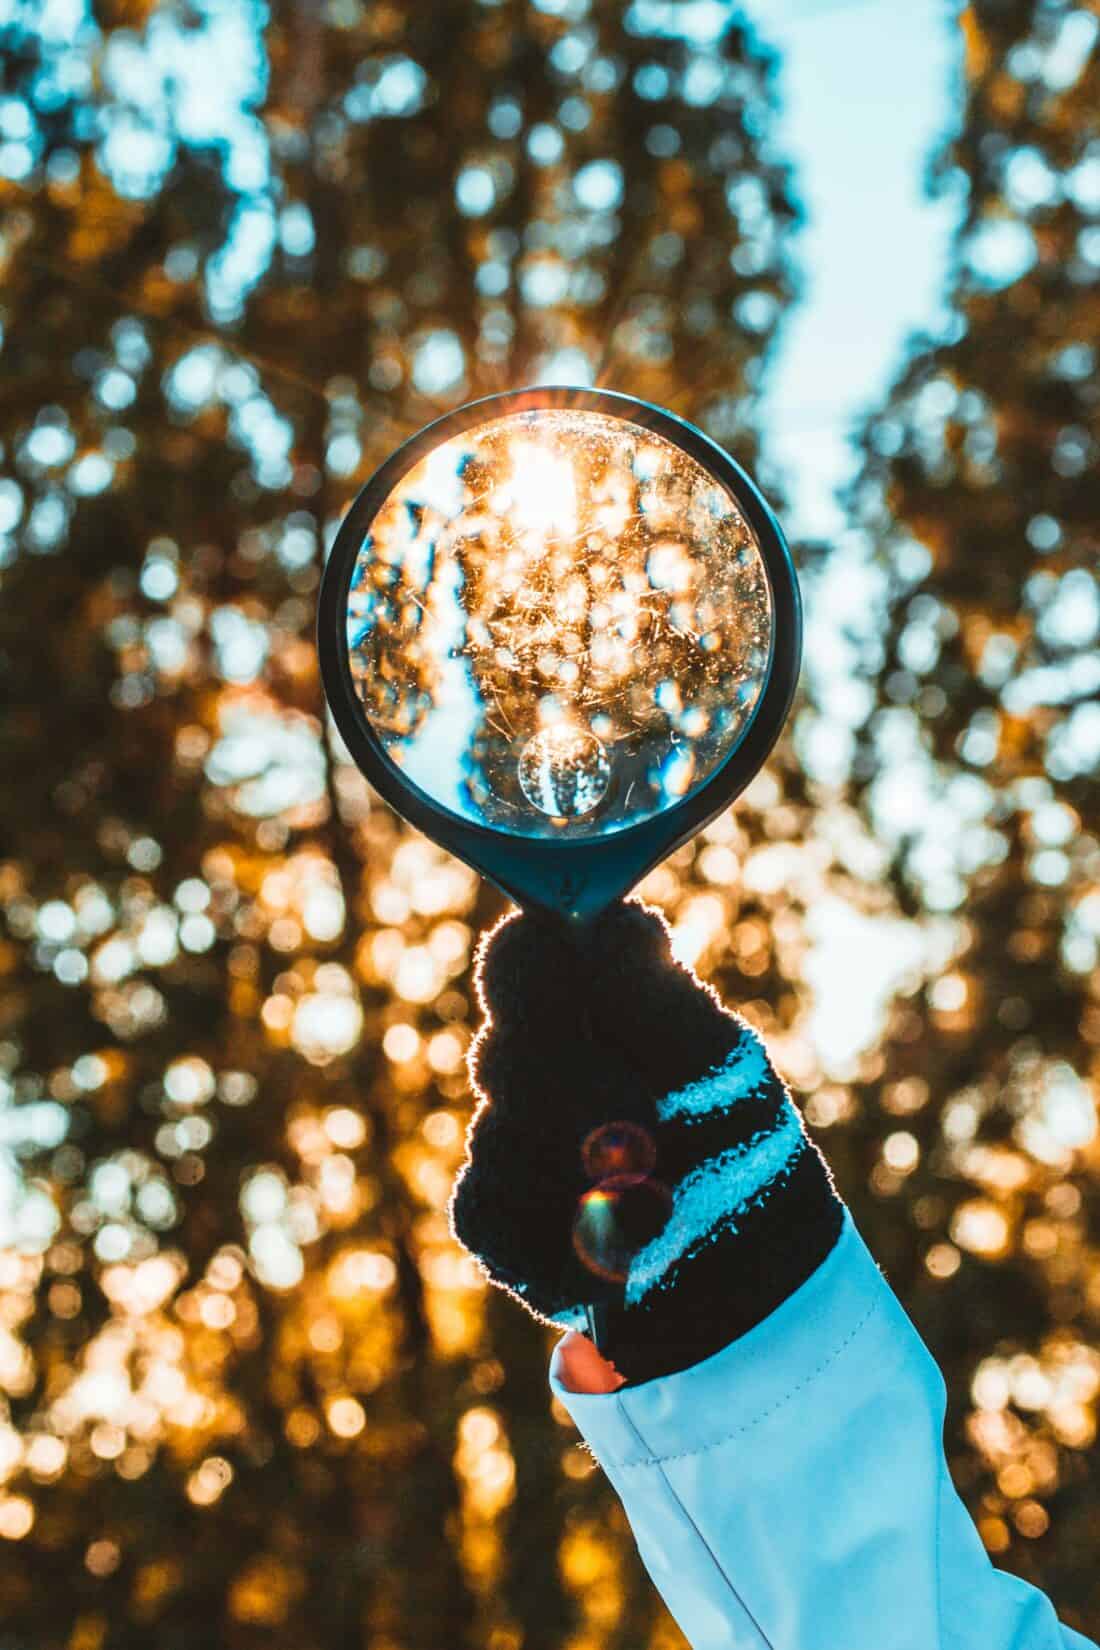 A gloved hand holds up a magnifying glass against a backdrop of sunlit trees. The magnifying glass captures and enlarges the golden reflections of sunlight shining through the branches—an inspiring scene for anyone planning a garden design. The glove has black, white, and blue stripes.